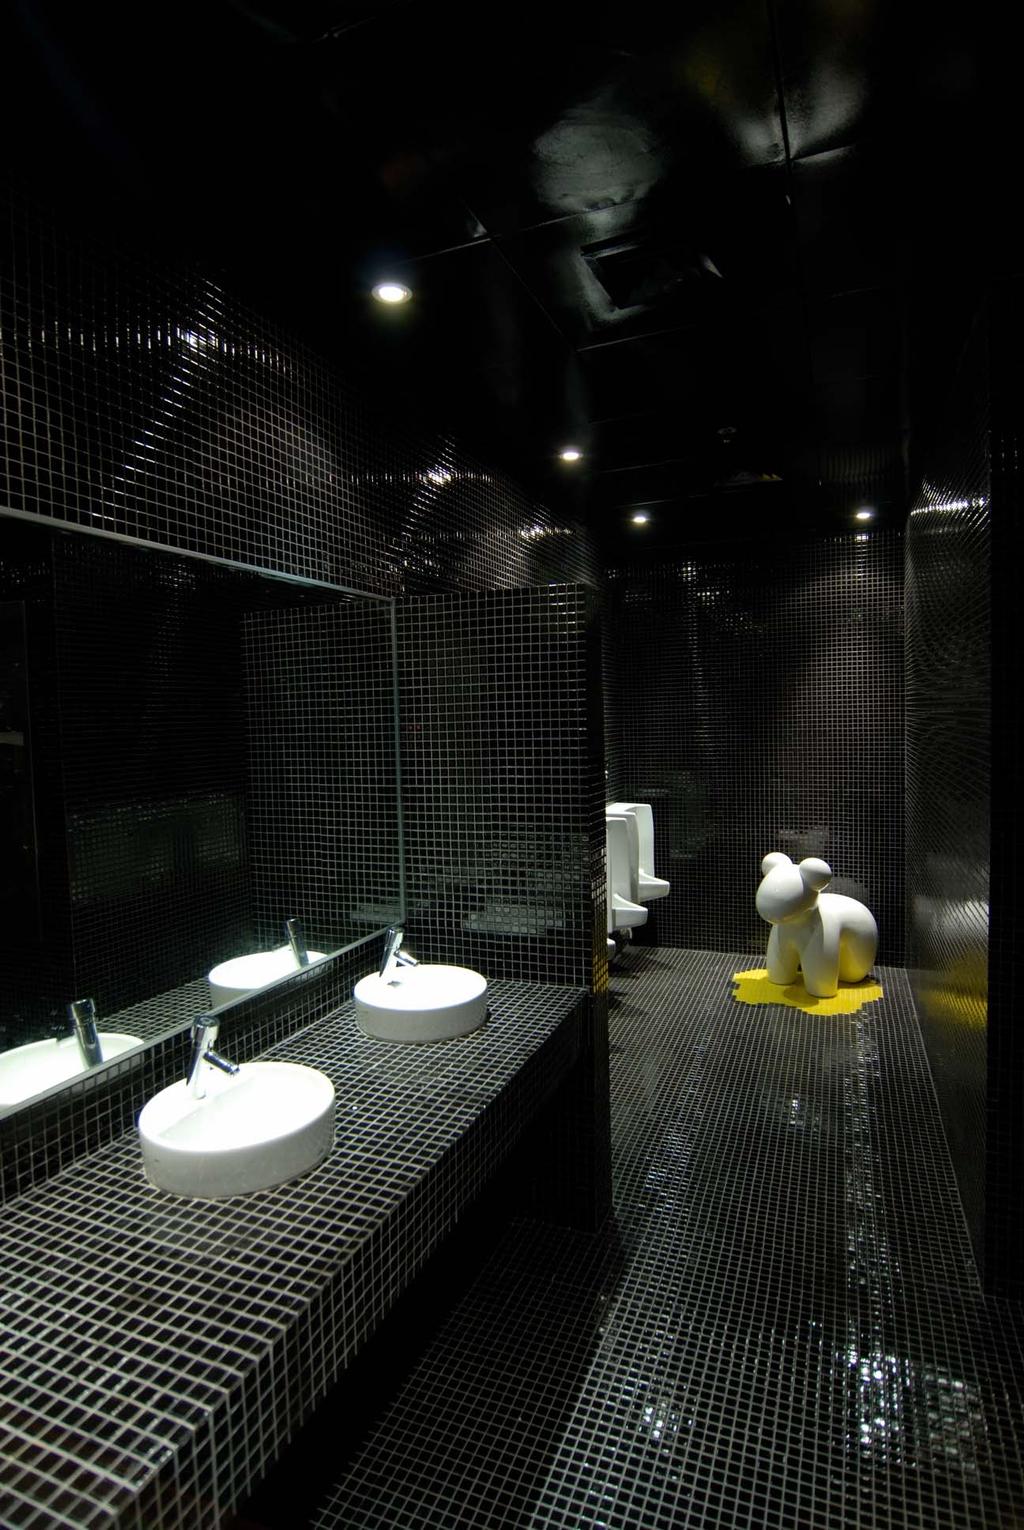 BBH, Commercial, Architect, Ministry of Design, Contemporary, Black Wall, Recessed Lights, Black Tiled Floor, White Basin, Mirror, Inflatable, Bathroom, Indoors, Interior Design, Room